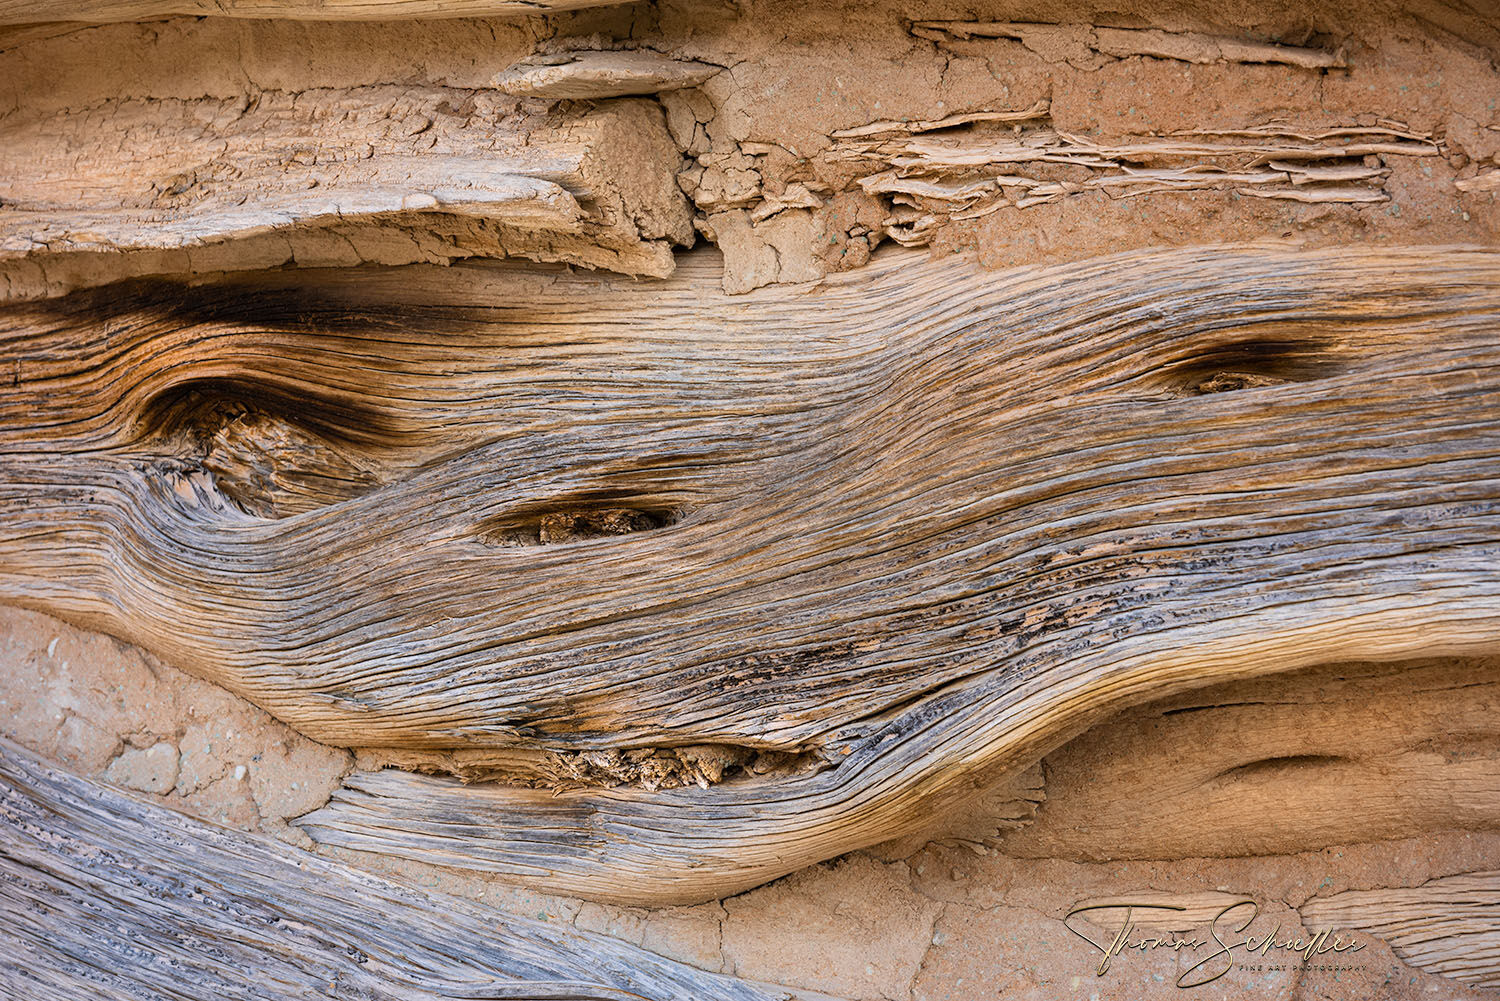 Natural beauty comes in small packages | Remarkable textures and details emerge in ancient weathered wood on a small Utah ranch | Limited Edition prints